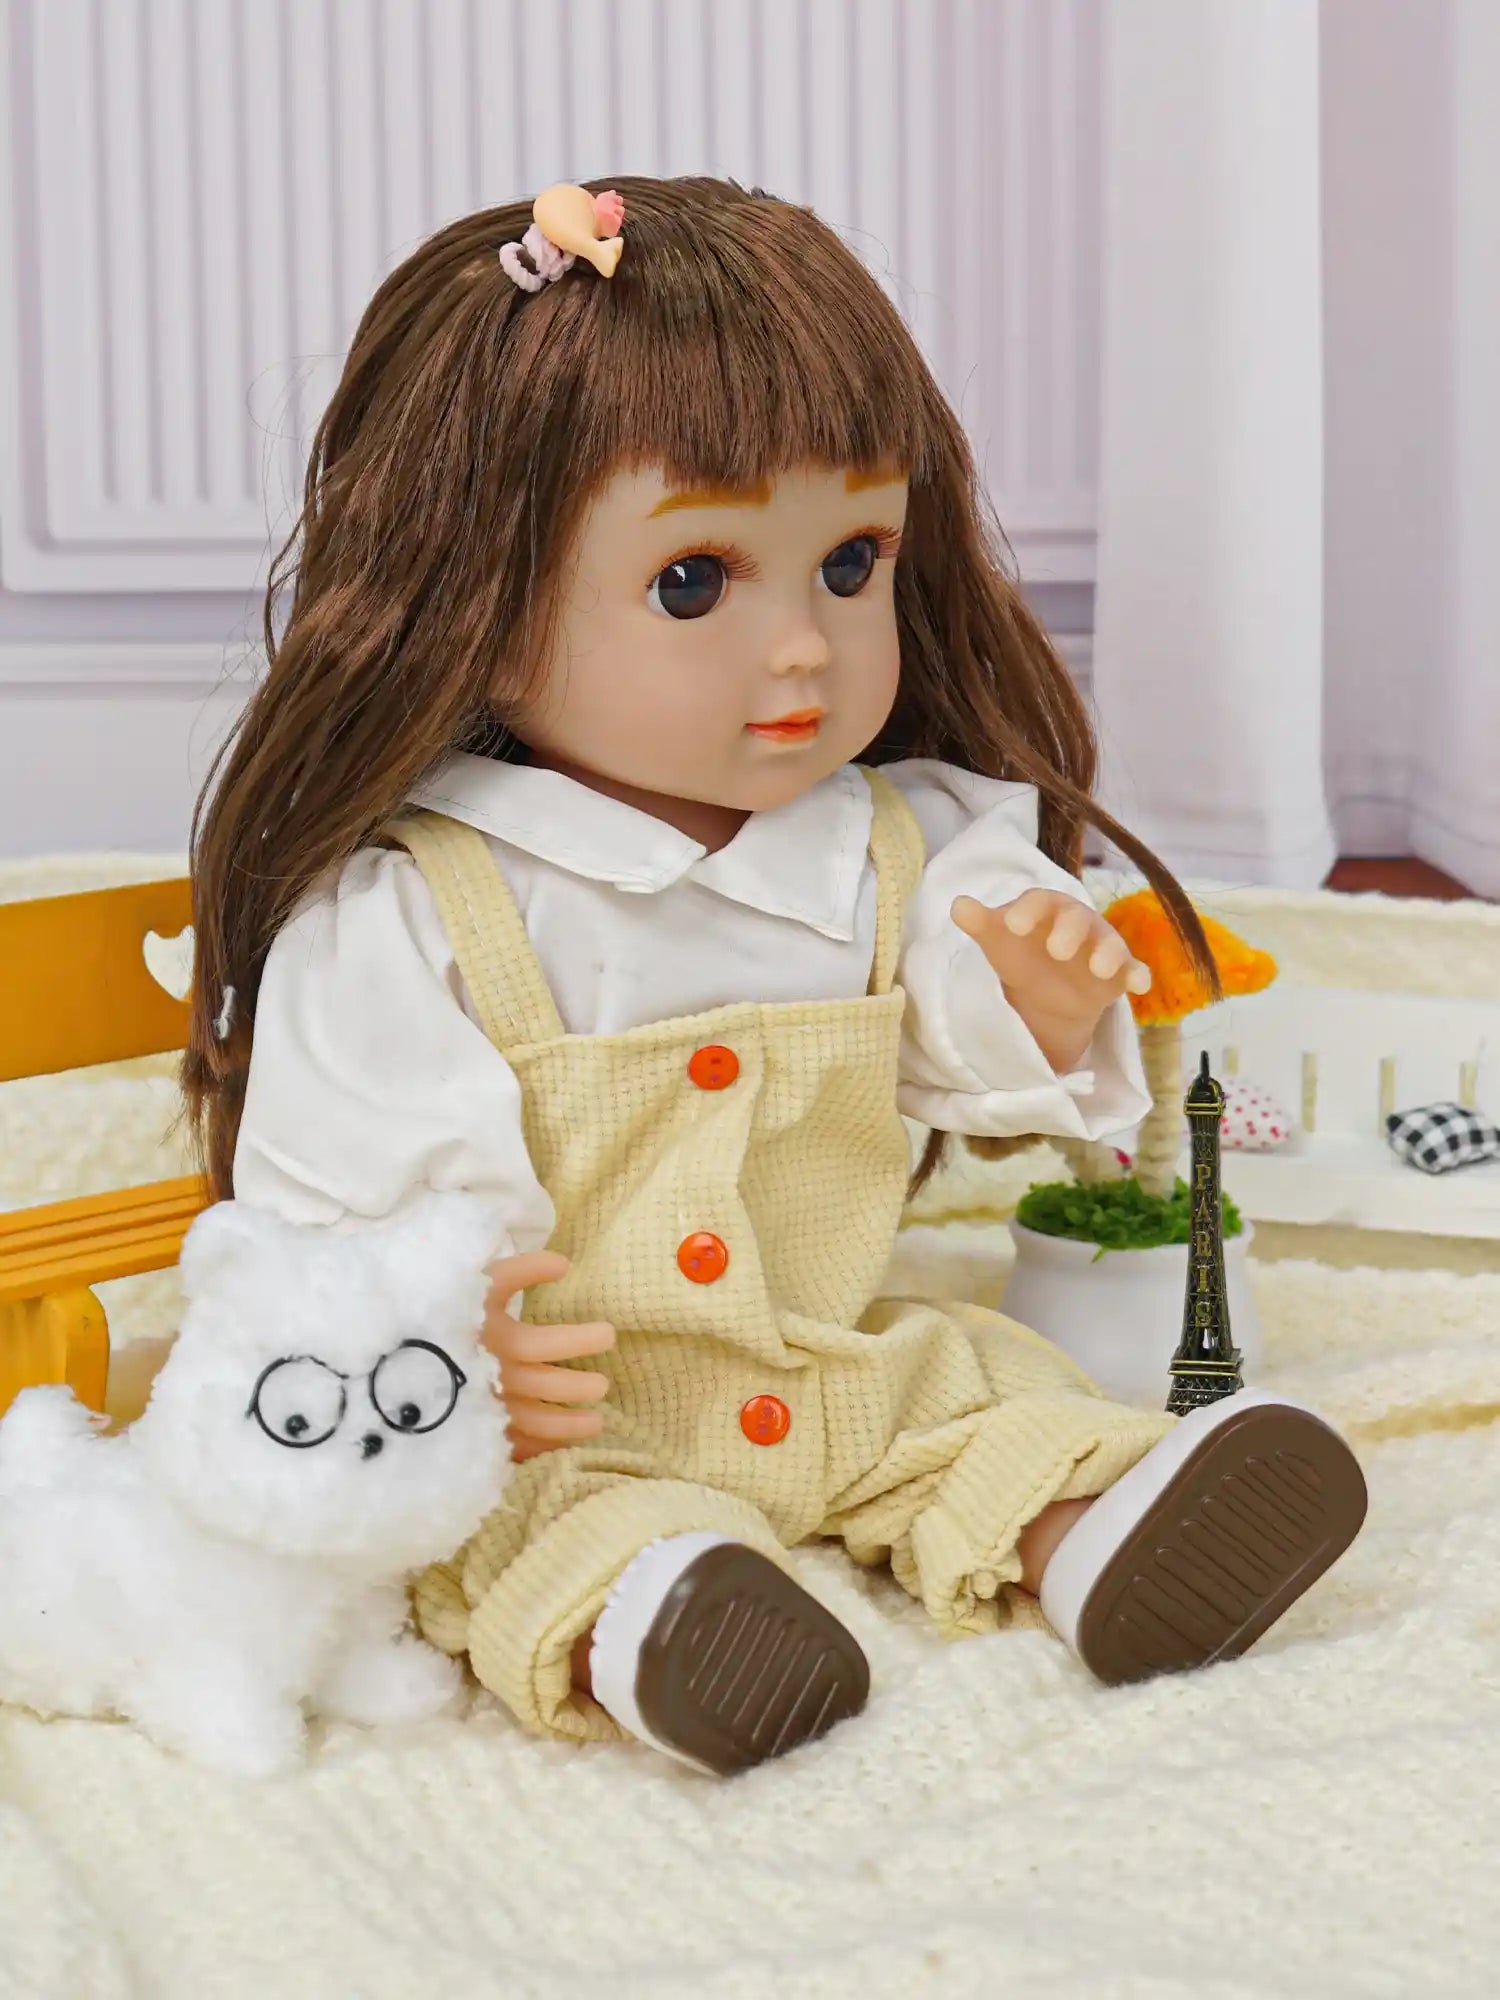 Doll with blue eyes, dressed in overalls, sitting by a toy dog and a metal tower.